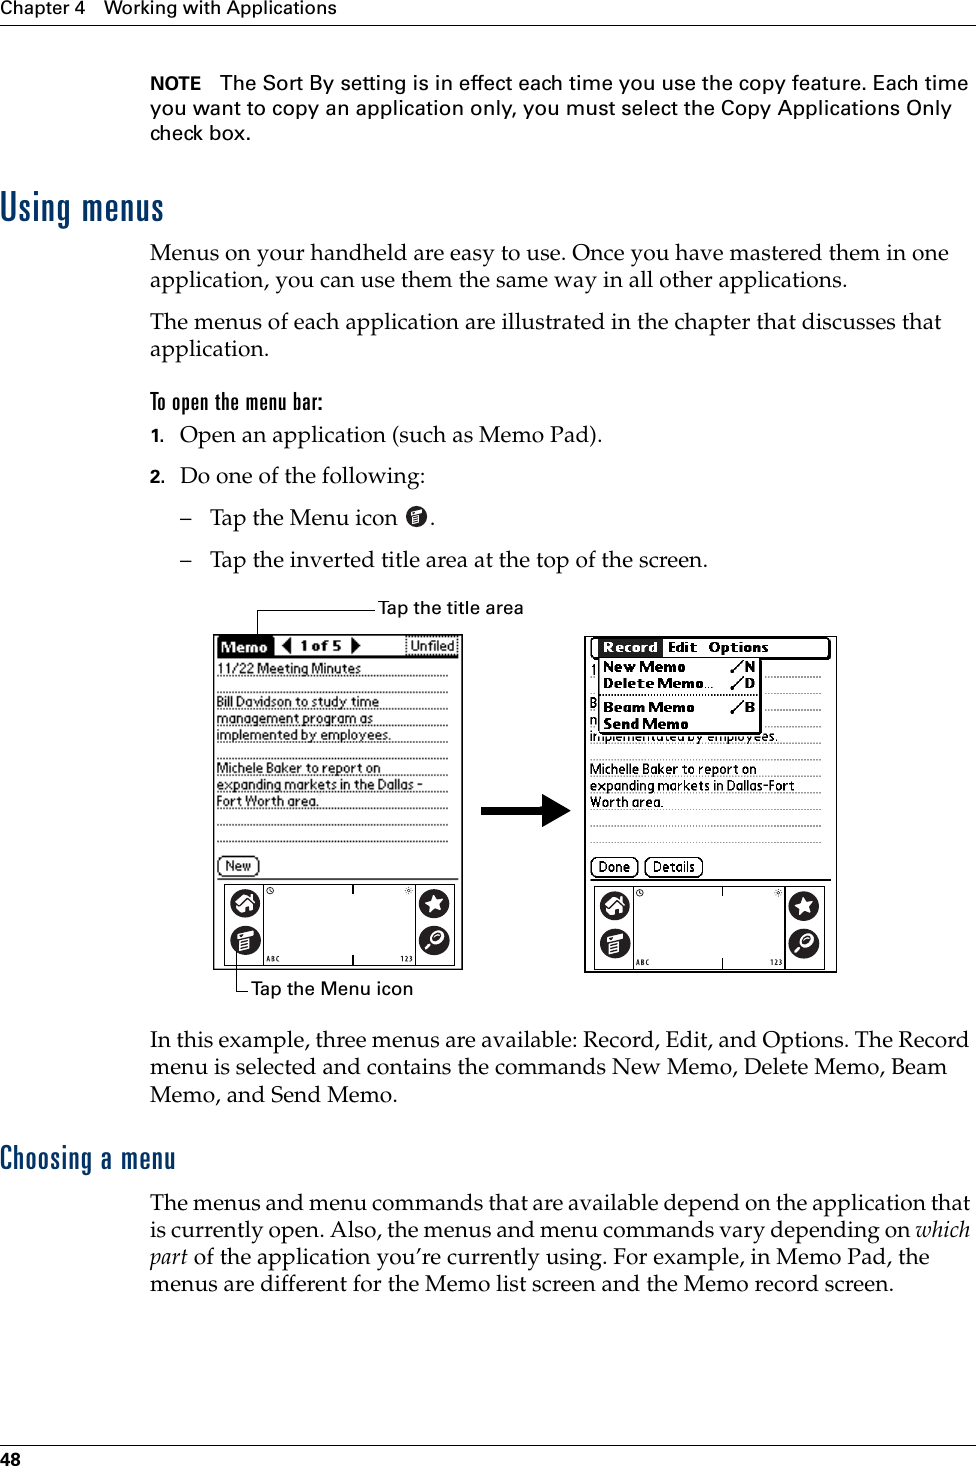 Chapter 4 Working with Applications48NOTE The Sort By setting is in effect each time you use the copy feature. Each time you want to copy an application only, you must select the Copy Applications Only check box.Using menusMenus on your handheld are easy to use. Once you have mastered them in one application, you can use them the same way in all other applications.The menus of each application are illustrated in the chapter that discusses that application.To open the menu bar:1. Open an application (such as Memo Pad).2. Do one of the following:– Tap the Menu icon  . – Tap the inverted title area at the top of the screen.In this example, three menus are available: Record, Edit, and Options. The Record menu is selected and contains the commands New Memo, Delete Memo, Beam Memo, and Send Memo.Choosing a menuThe menus and menu commands that are available depend on the application that is currently open. Also, the menus and menu commands vary depending on which part of the application you’re currently using. For example, in Memo Pad, the menus are different for the Memo list screen and the Memo record screen.Tap the Menu iconTap the title areaPalm, Inc. Confidential